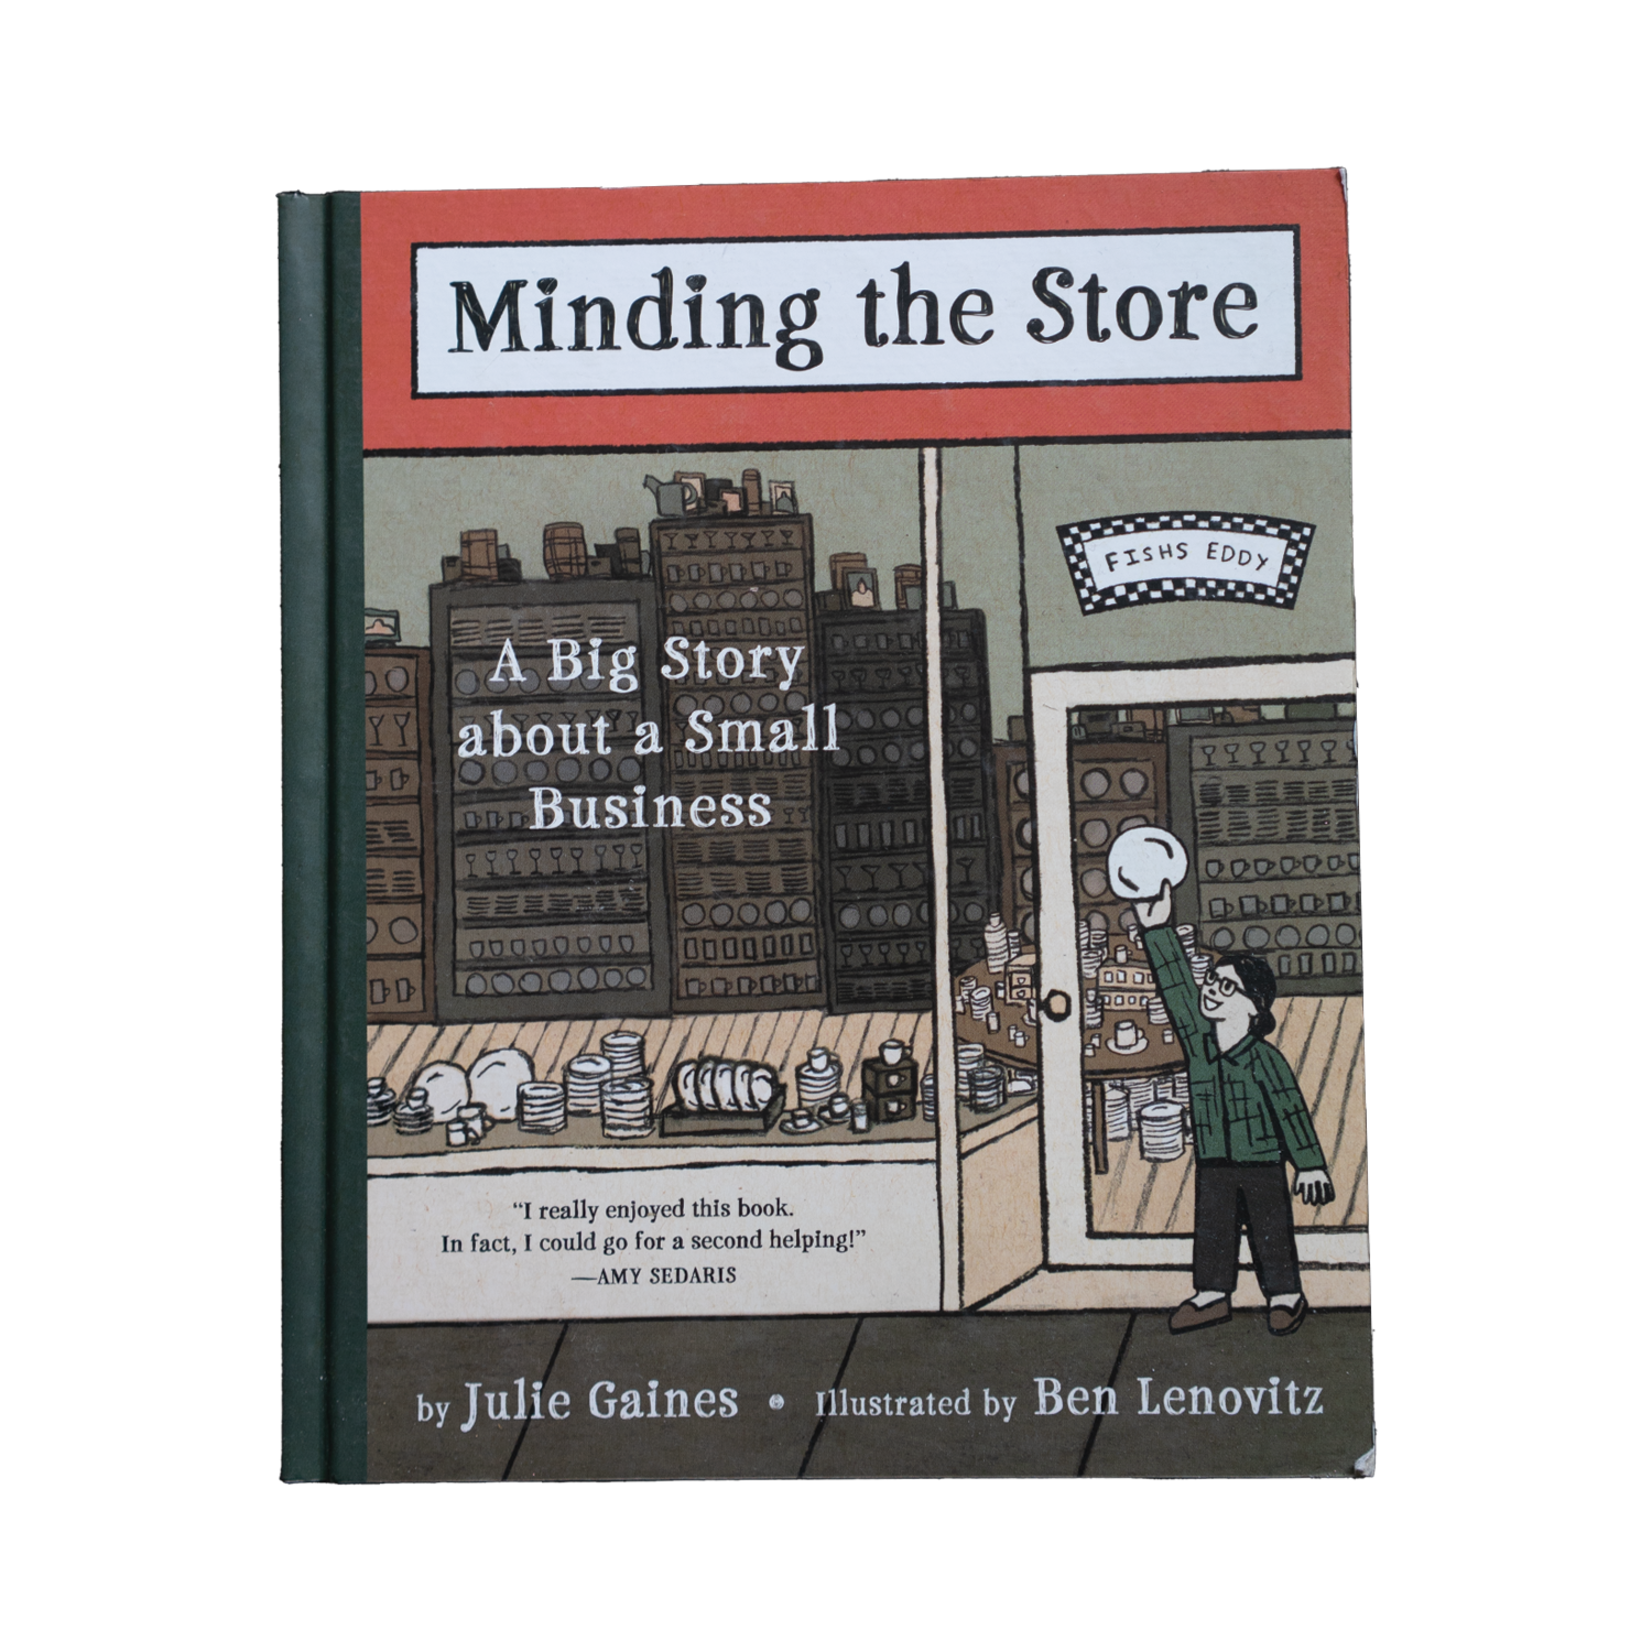 Minding the Store by Julie Gaines & Ben Lenovitz